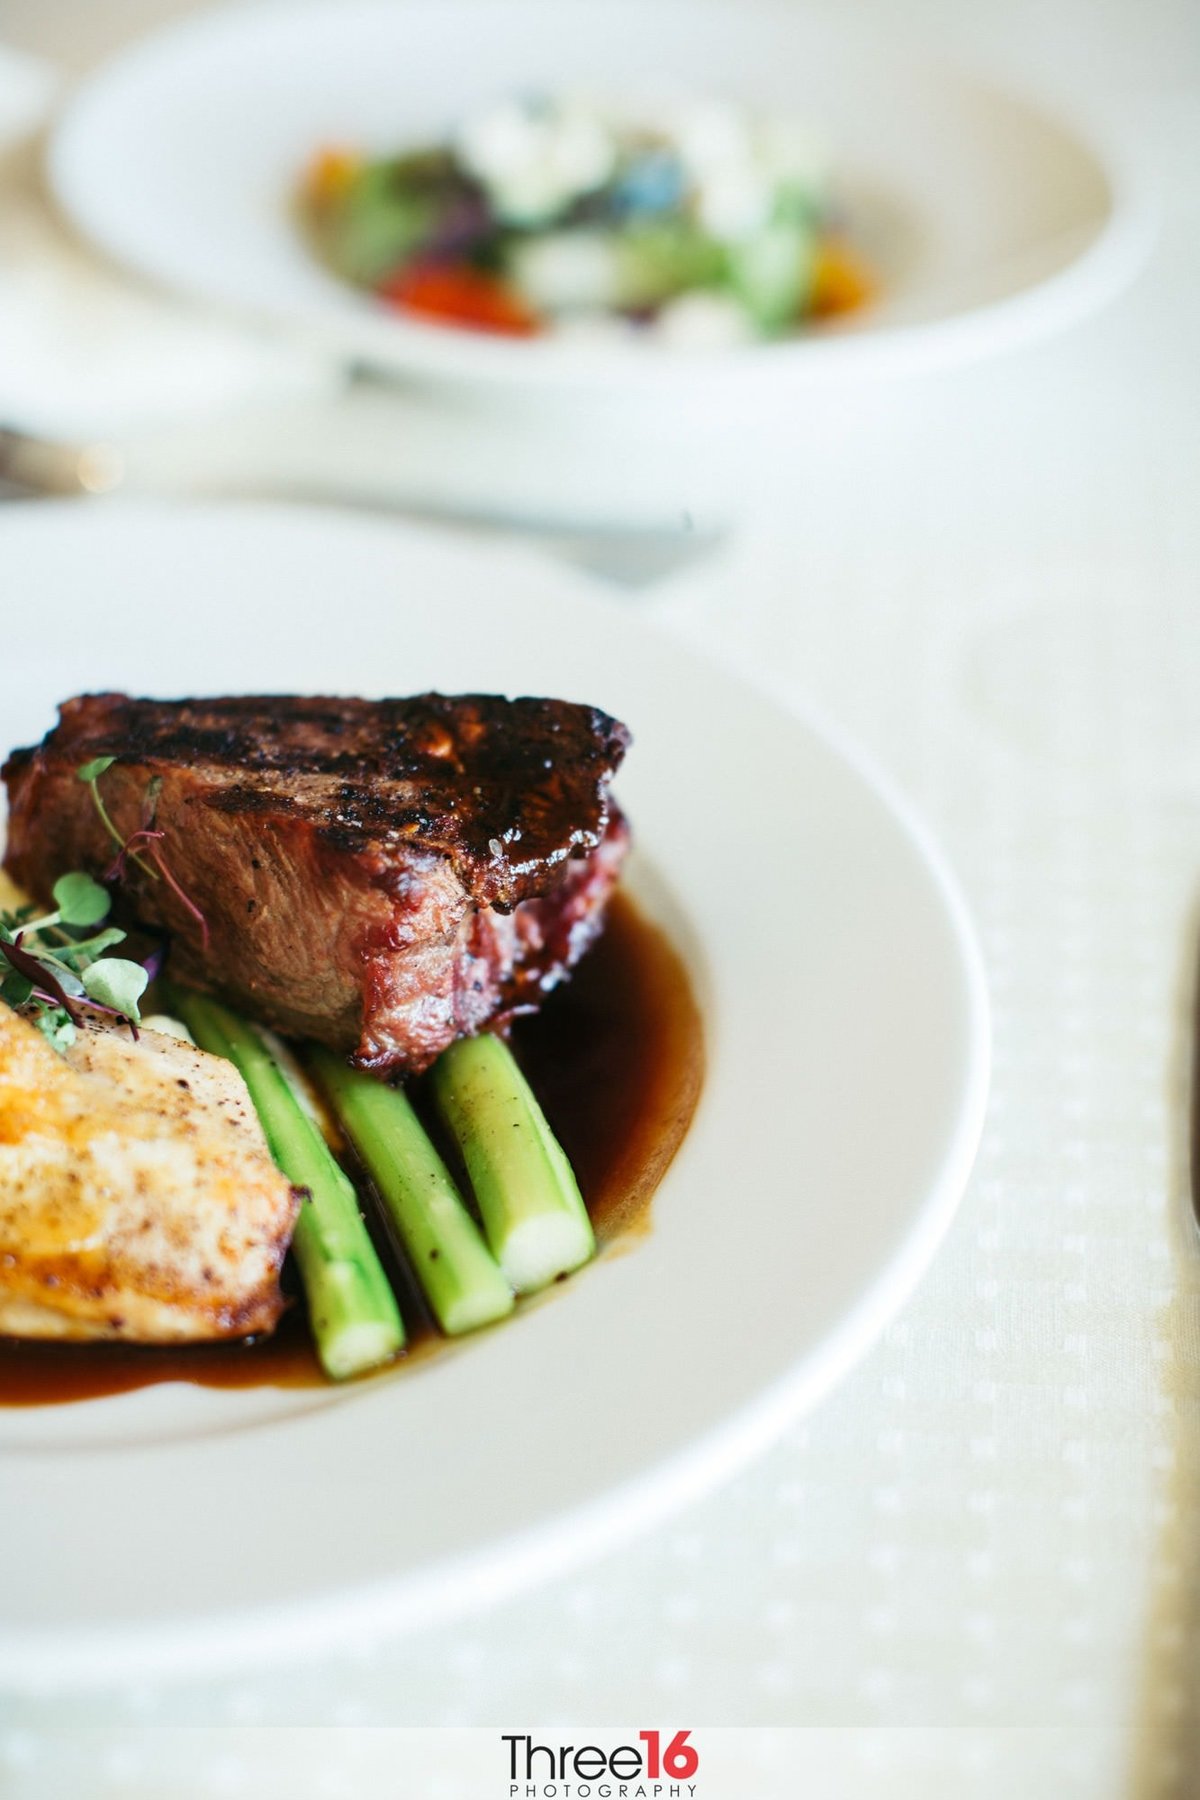 Steak and Asparagus is served at this wedding reception